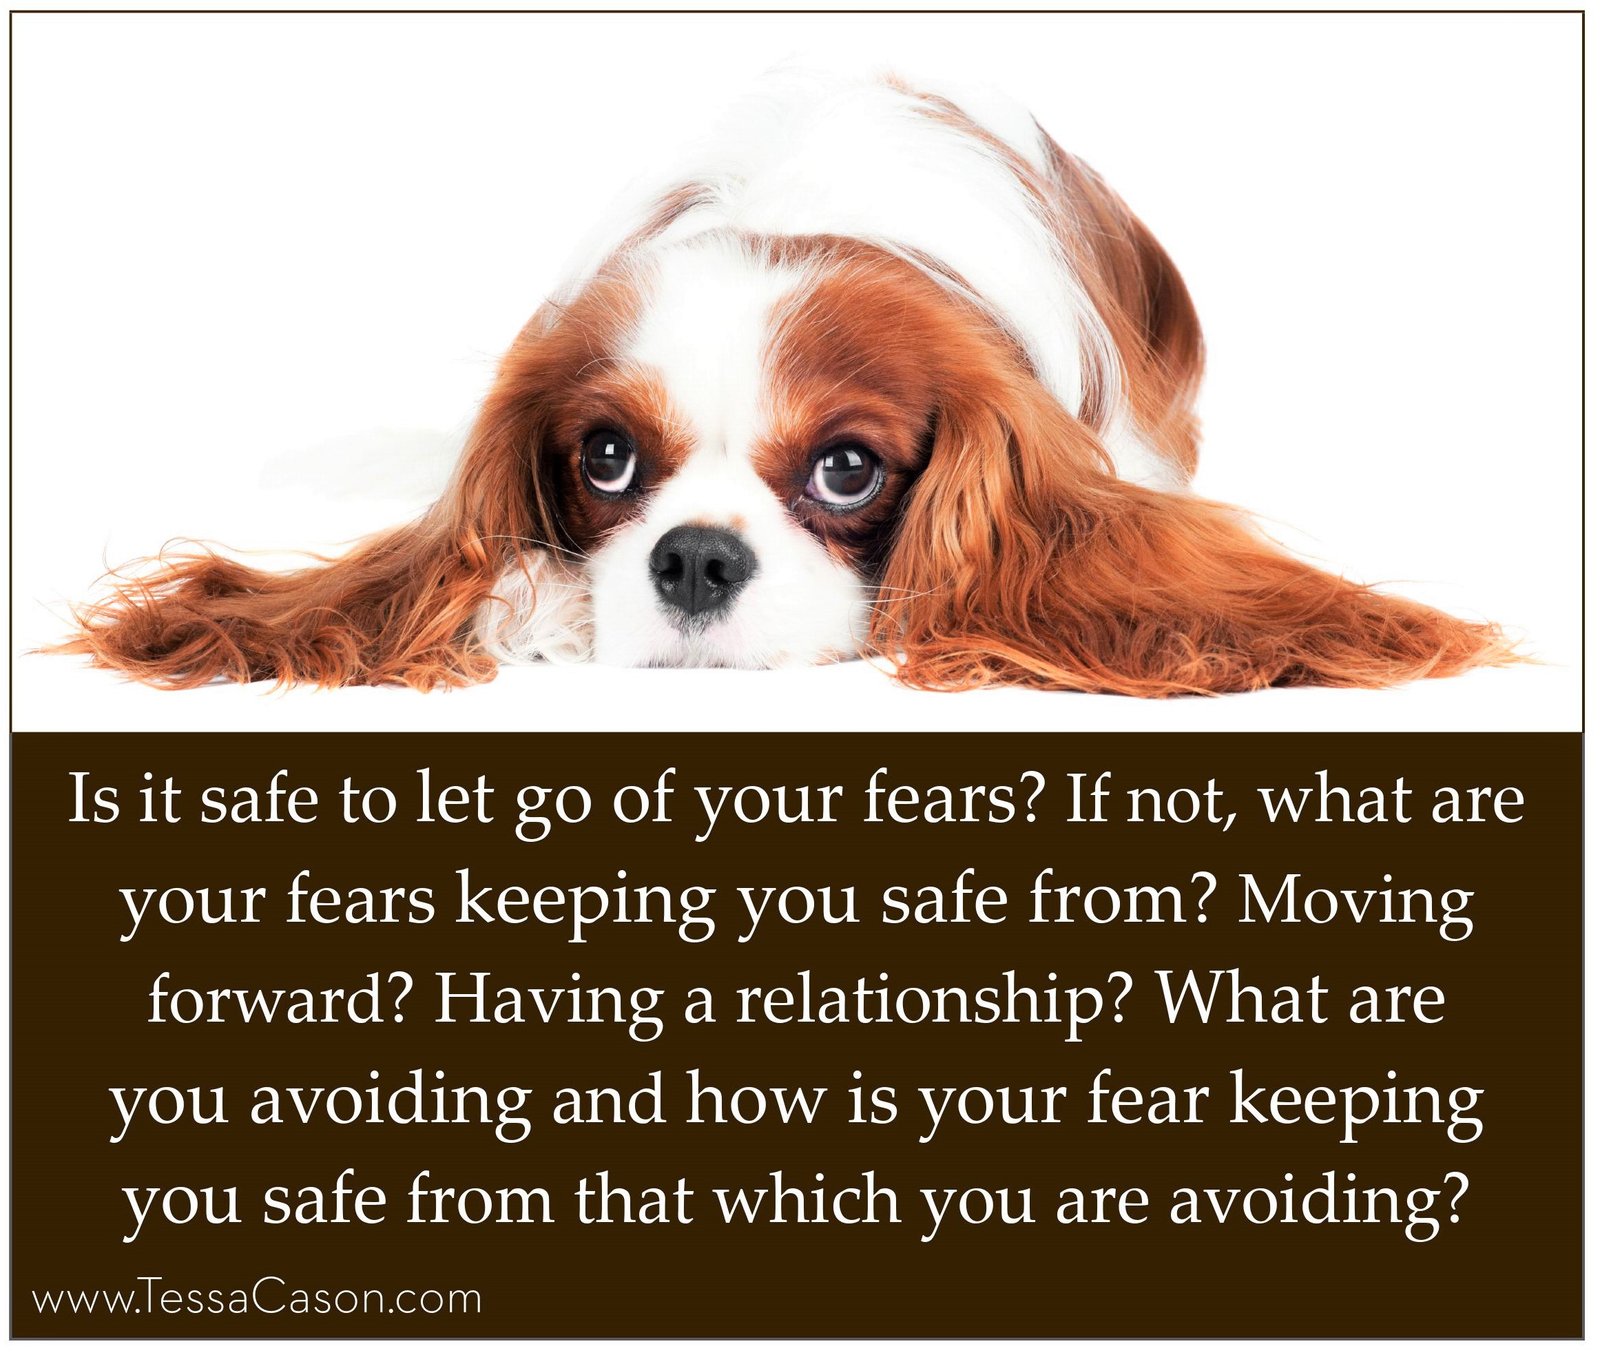 Is it safe to let go of your fears